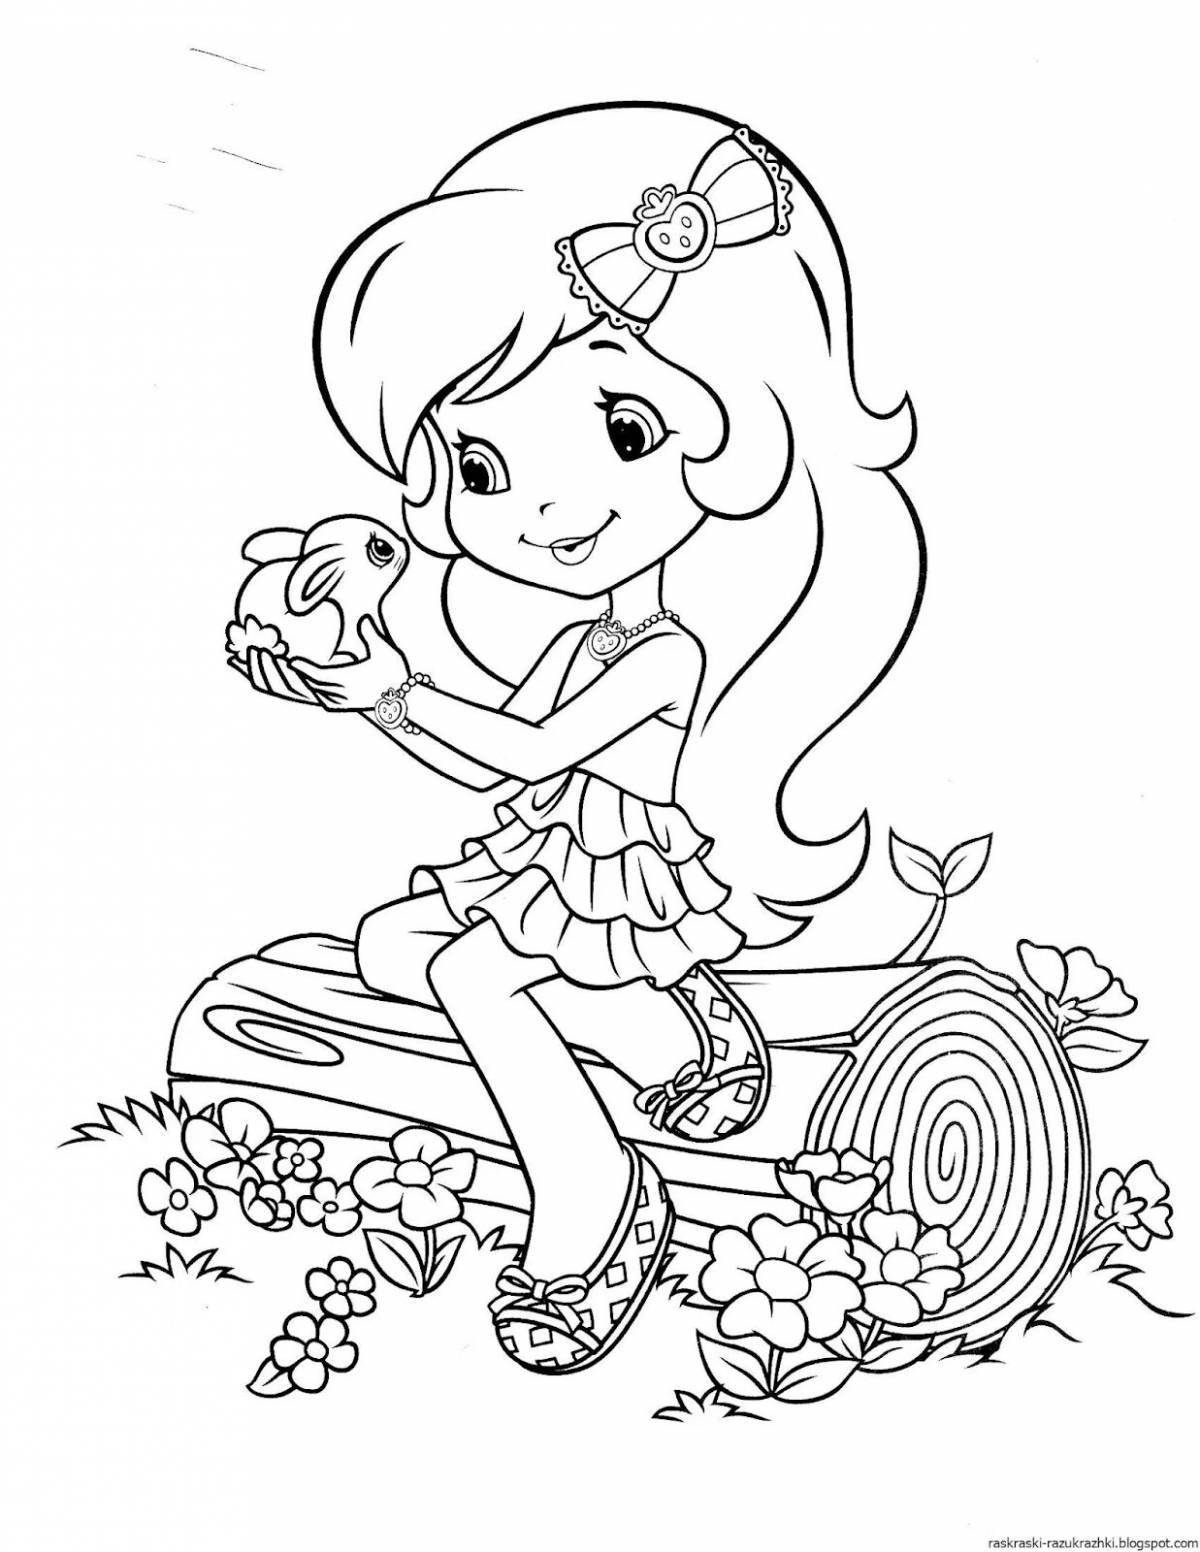 Fun coloring book for 9-12 year olds